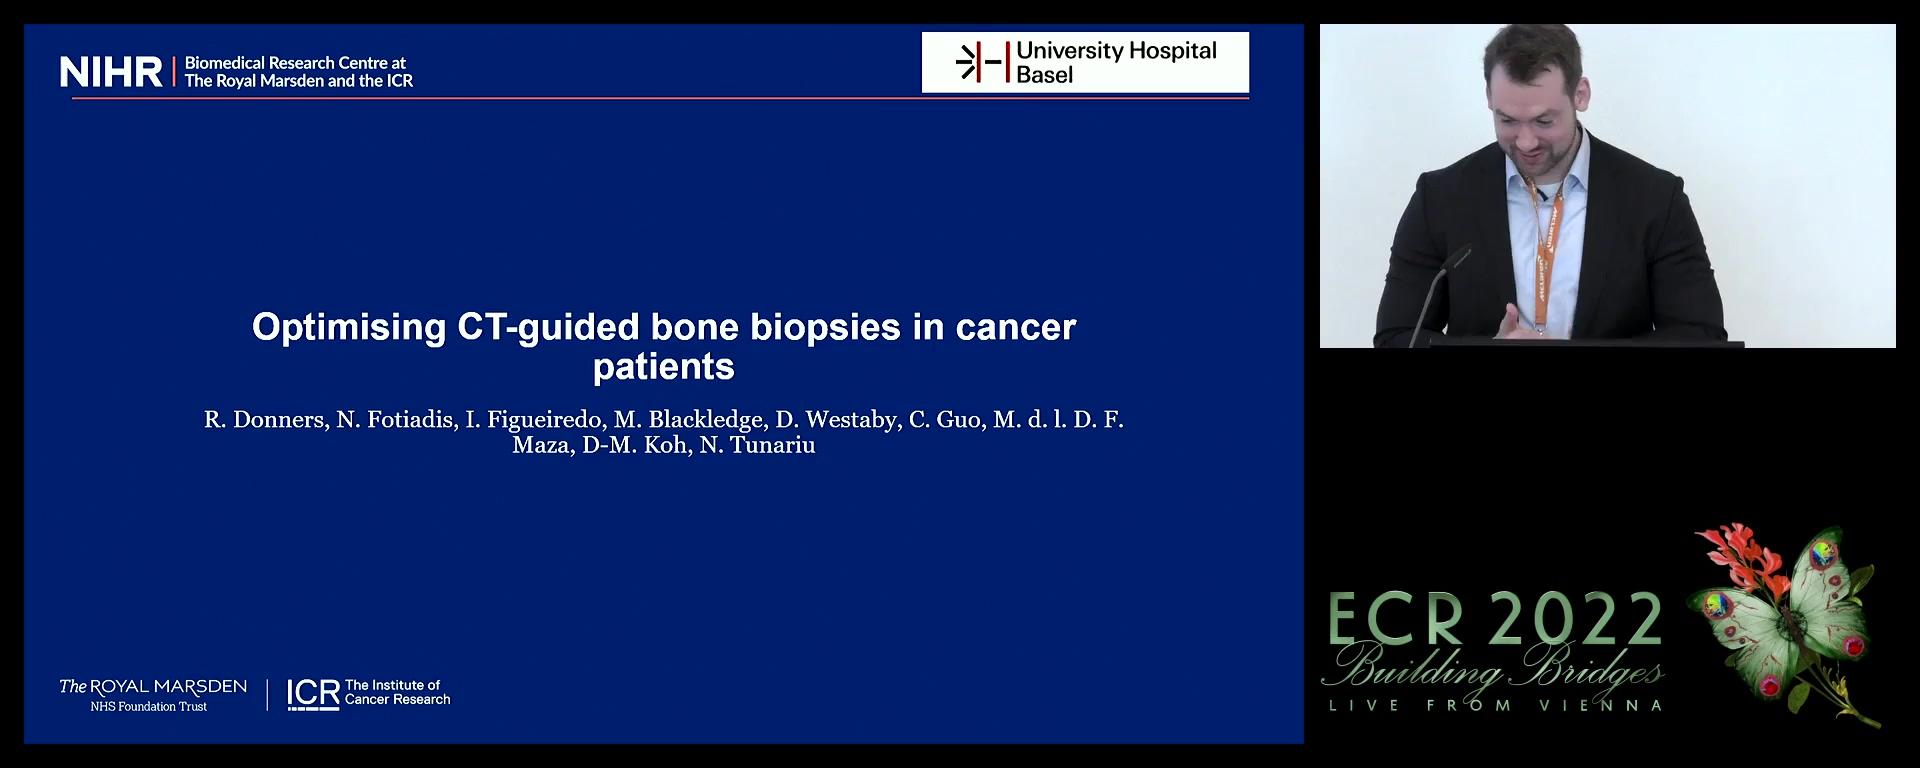 Optimising CT-guided bone biopsies in cancer patients - Ricardo Donners, Basel / CH